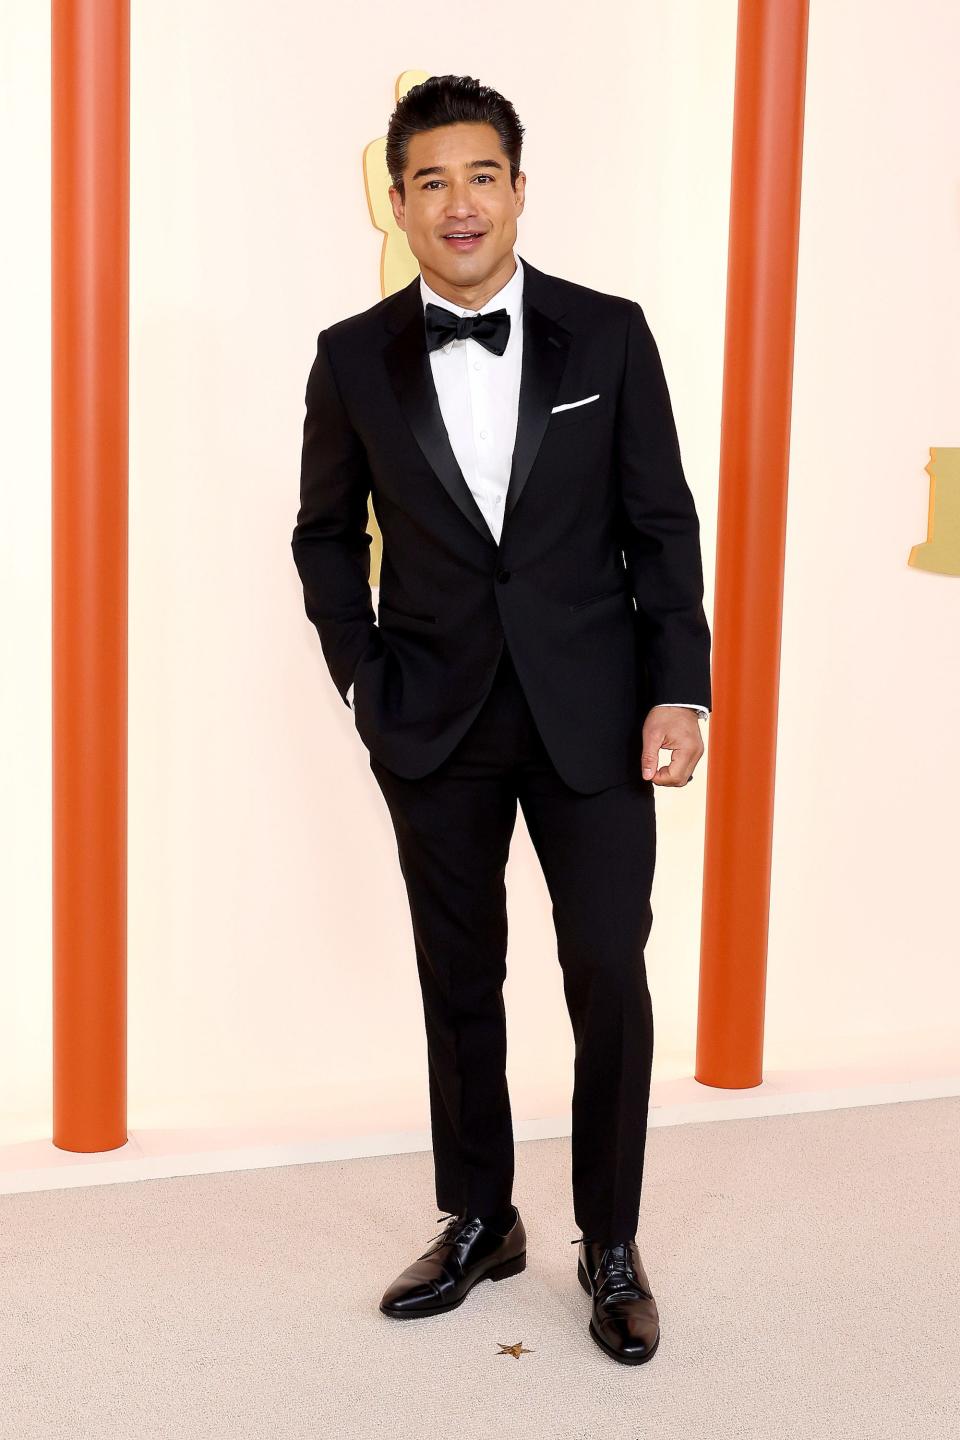 Mario Lopez attends the 2023 Academy Awards.